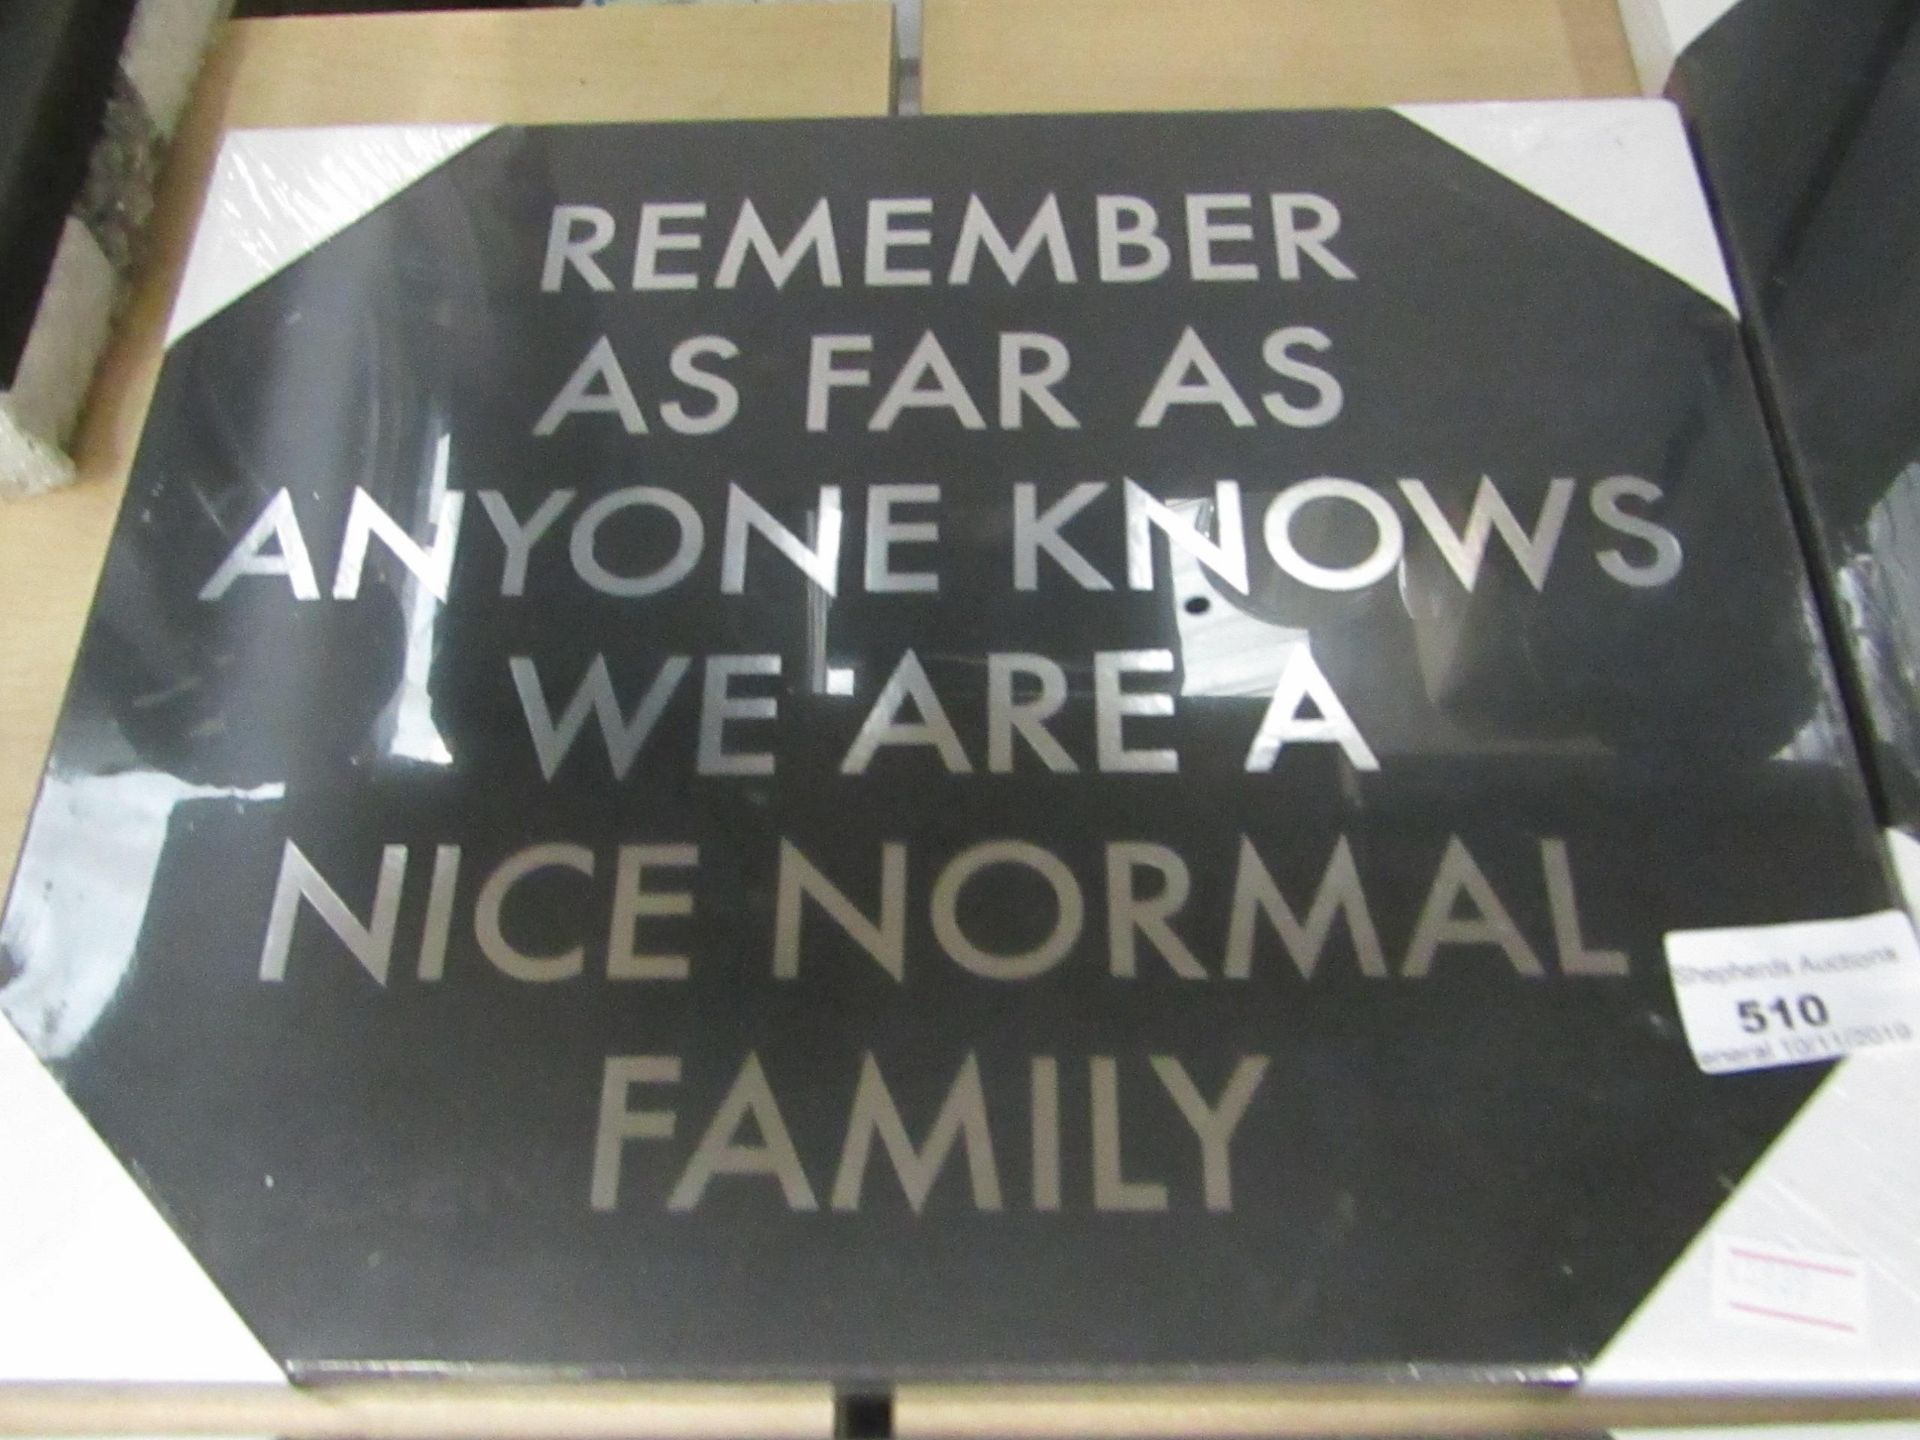 Normal Family' Sign. 30cm x 25cm.New & Packaged